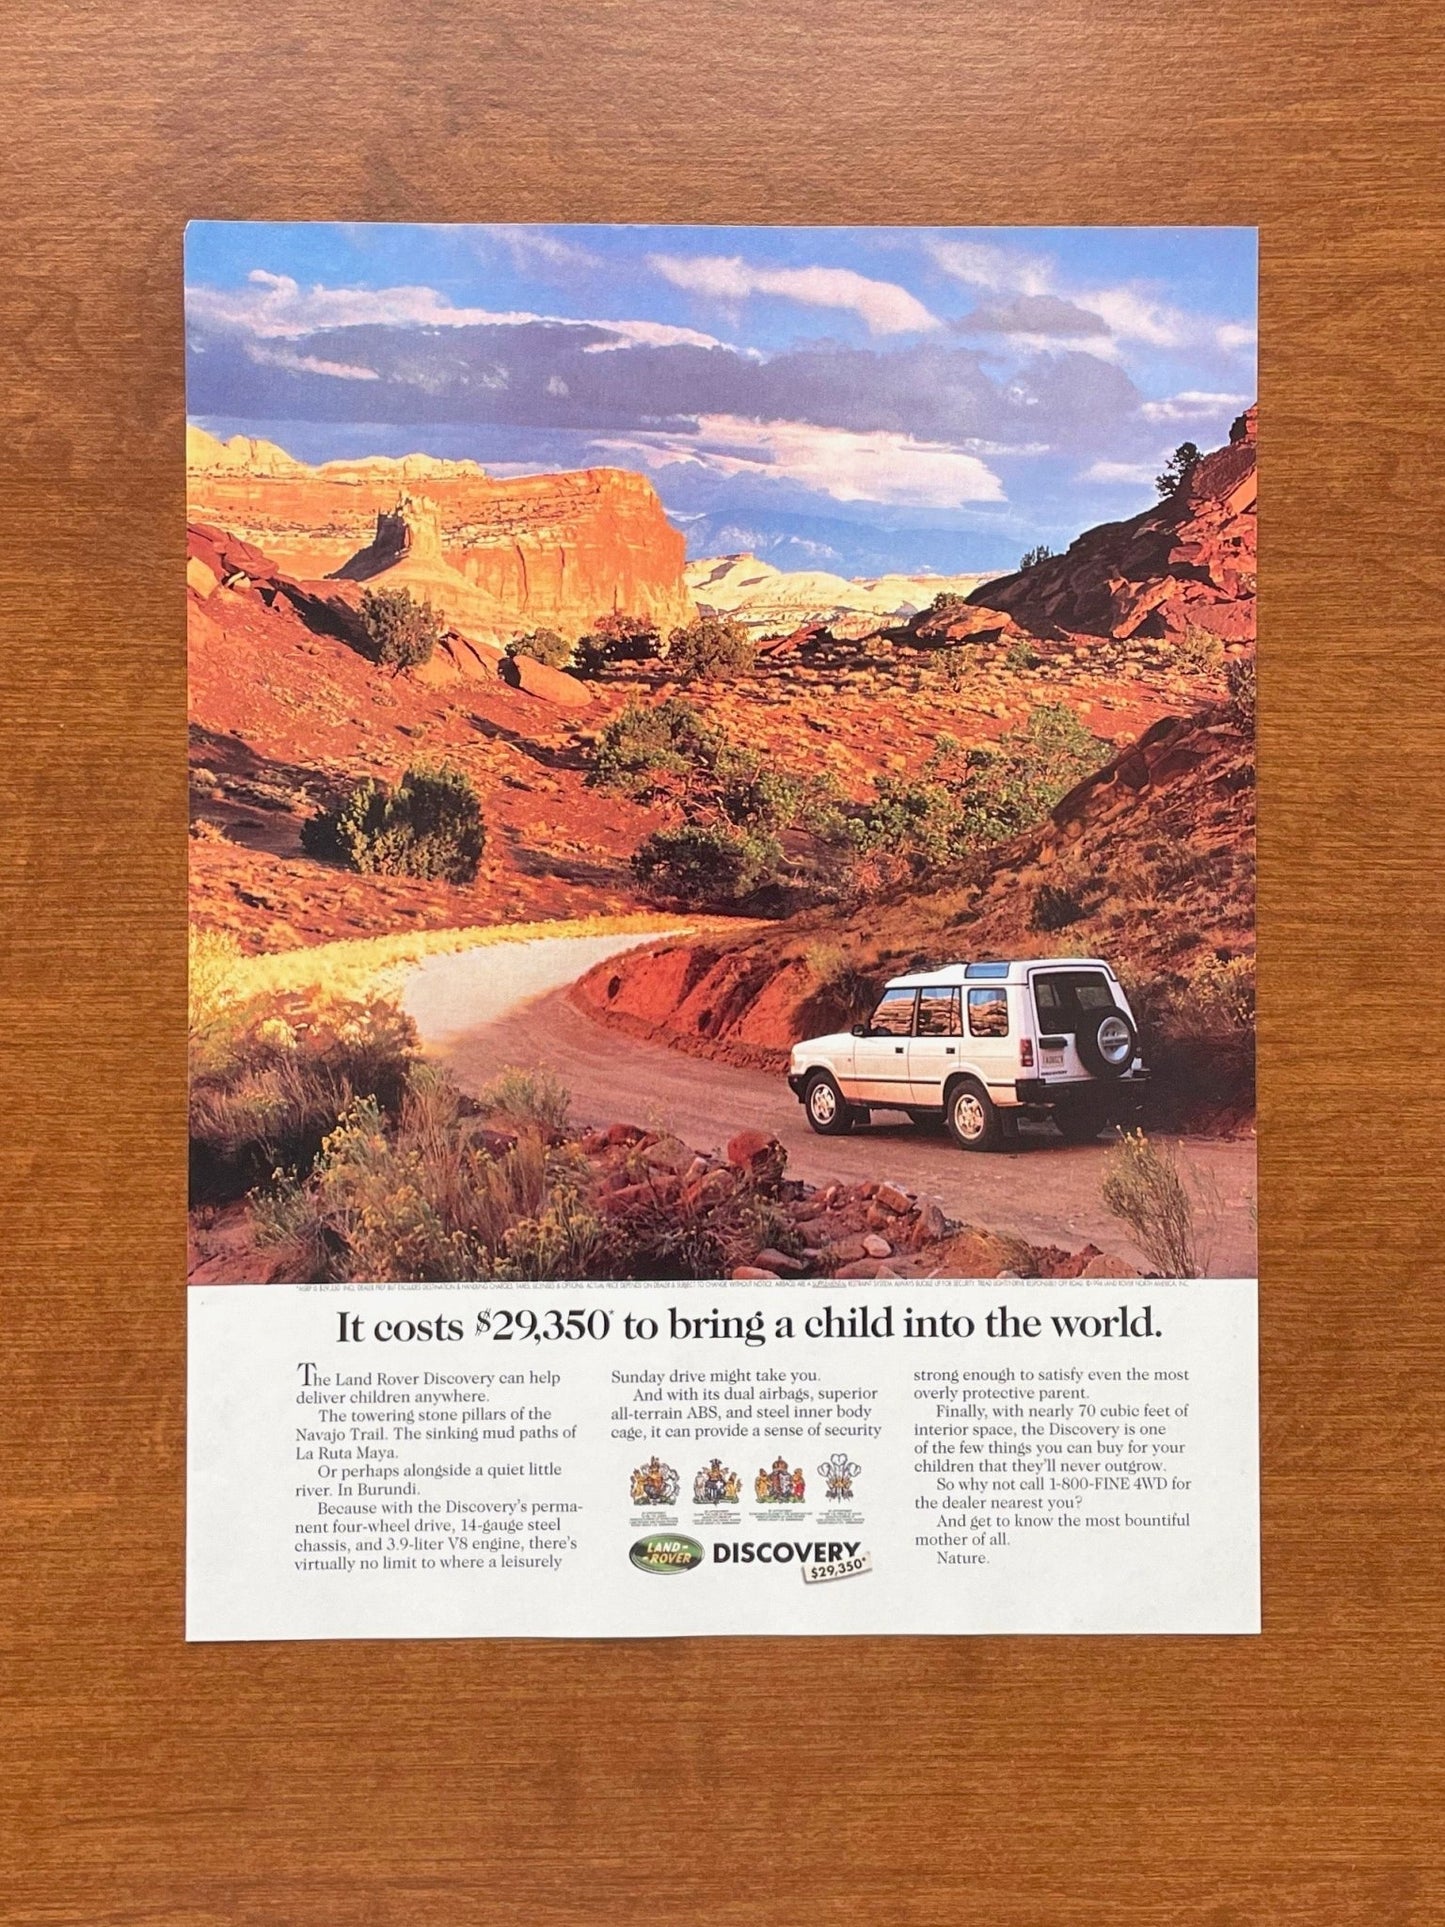 1995 Discovery "bring a child into the world." Advertisement